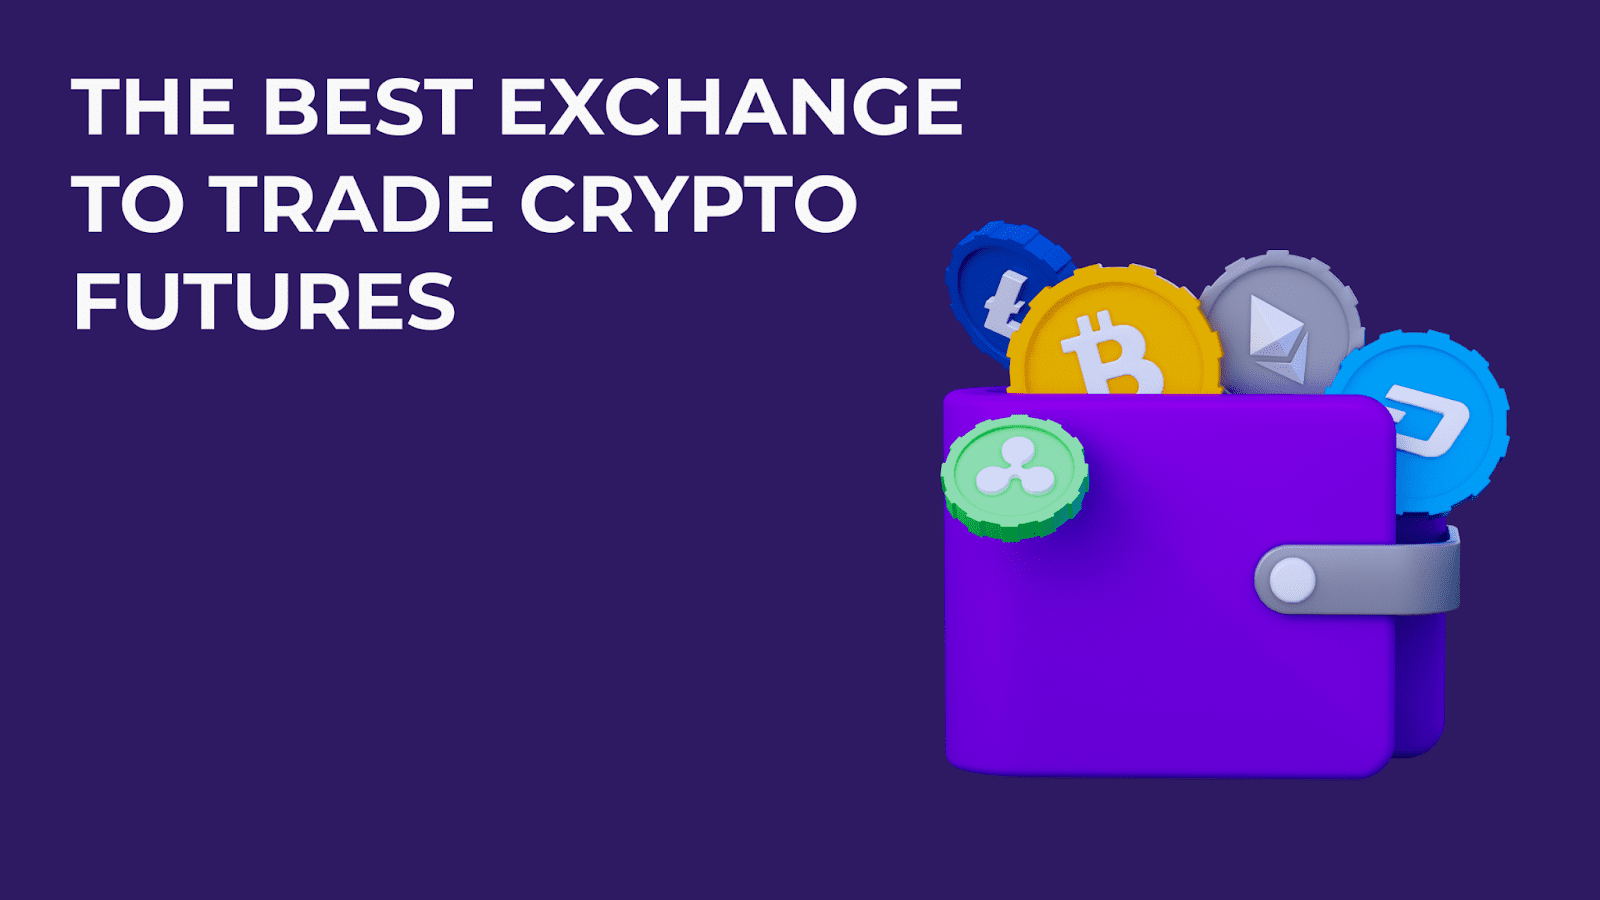 The best exchange to trade crypto futures